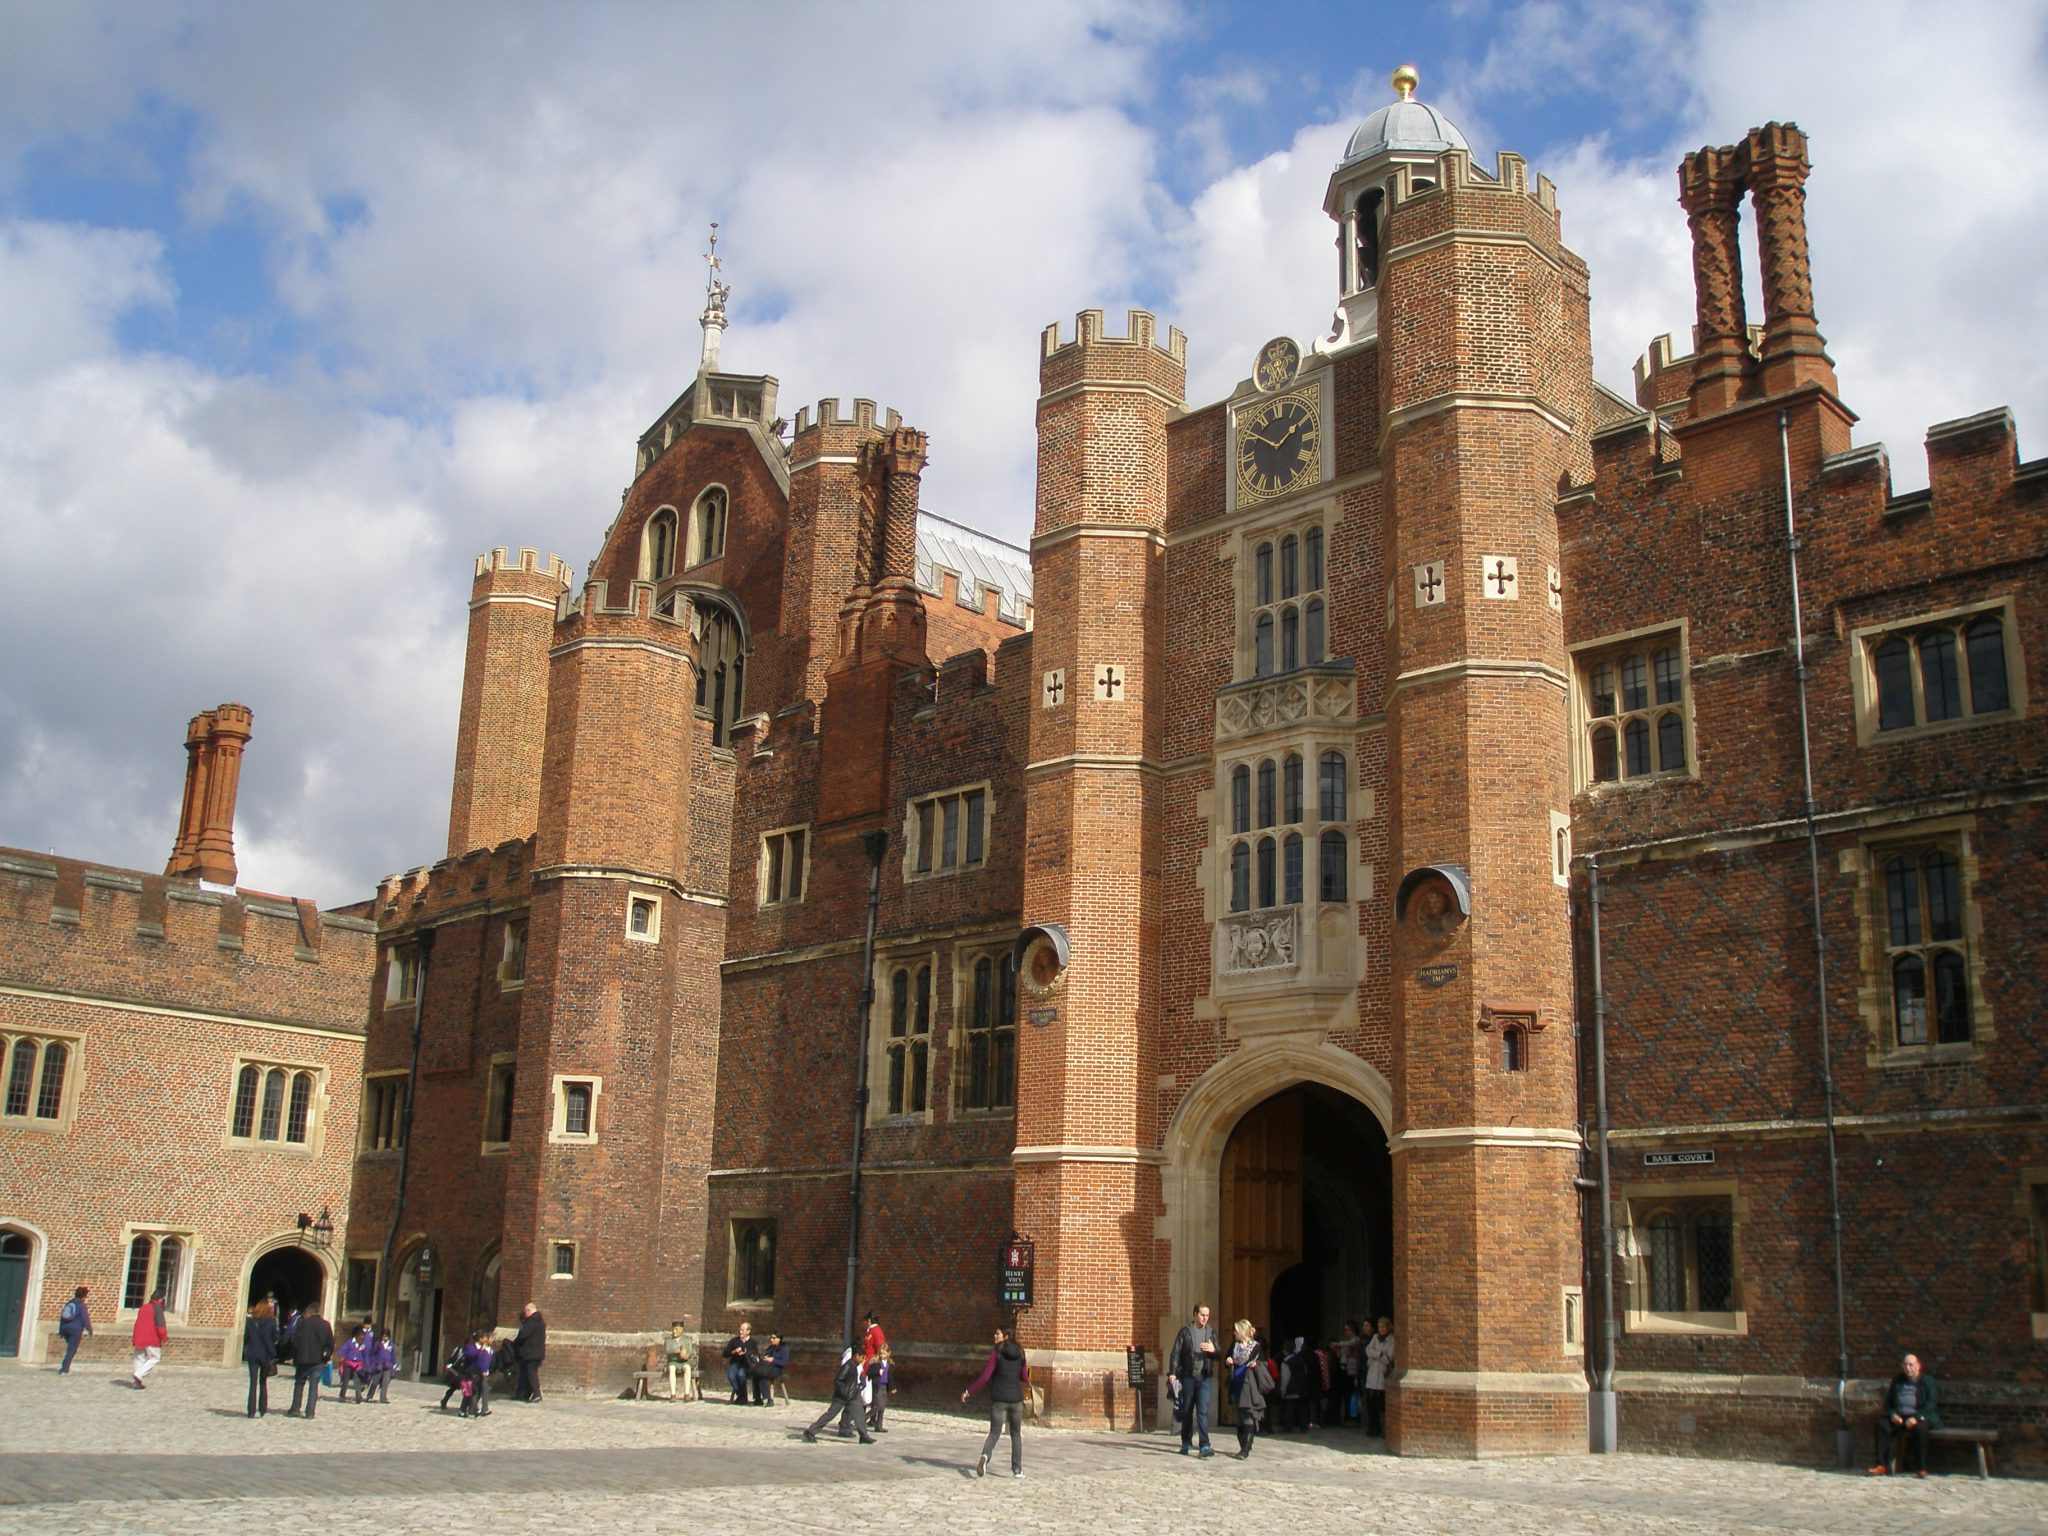 Anne Boleyn's Gatehouse, the middle gateway of the palace complex